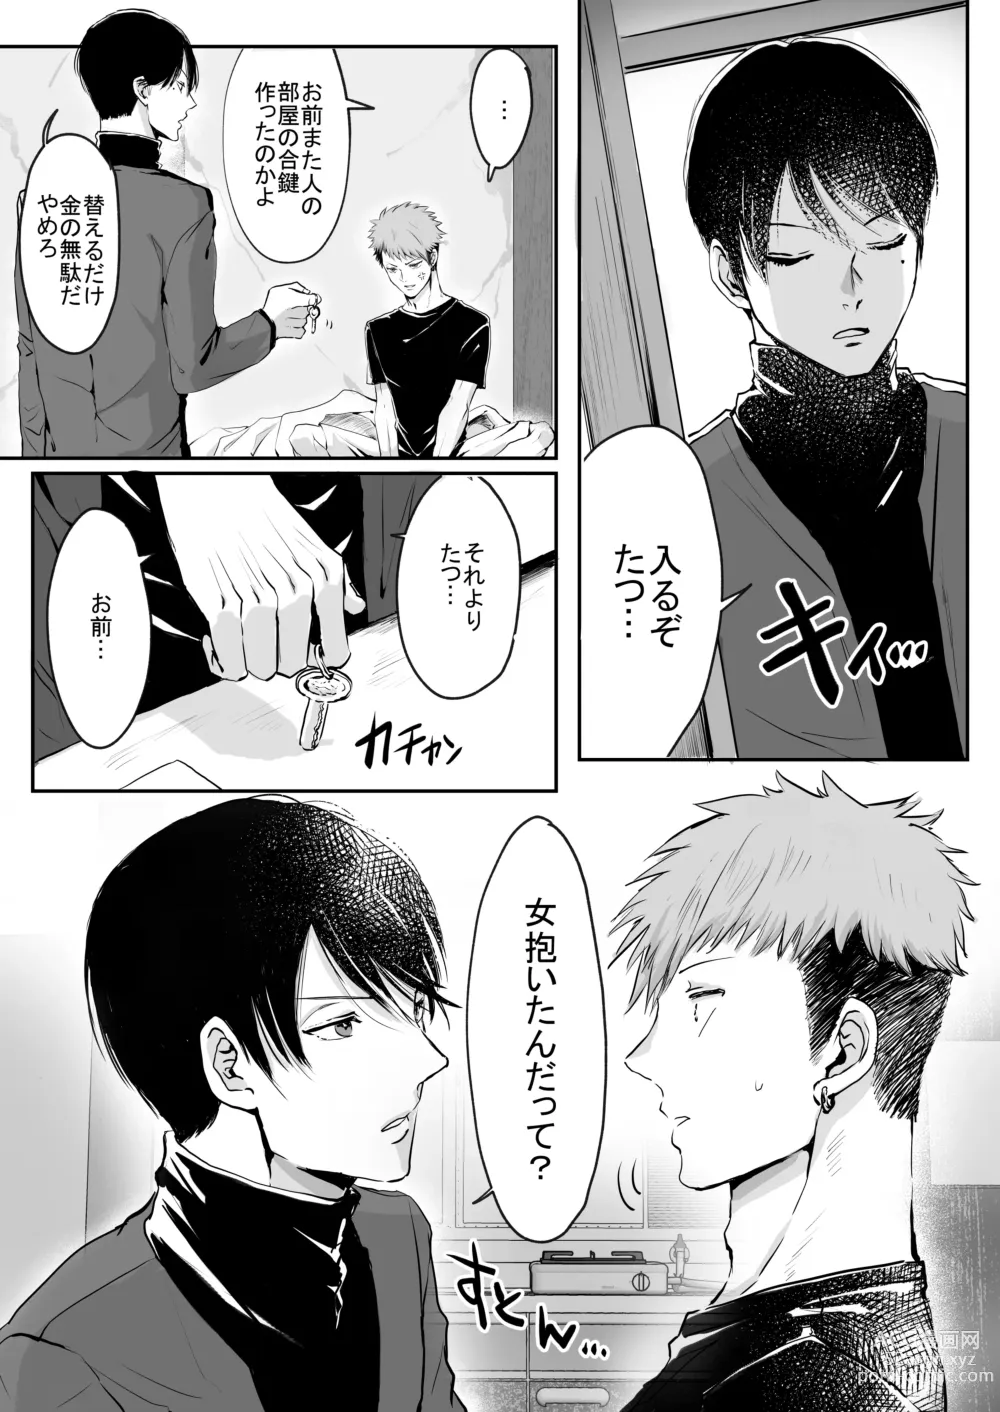 Page 14 of doujinshi Im crazy for you.